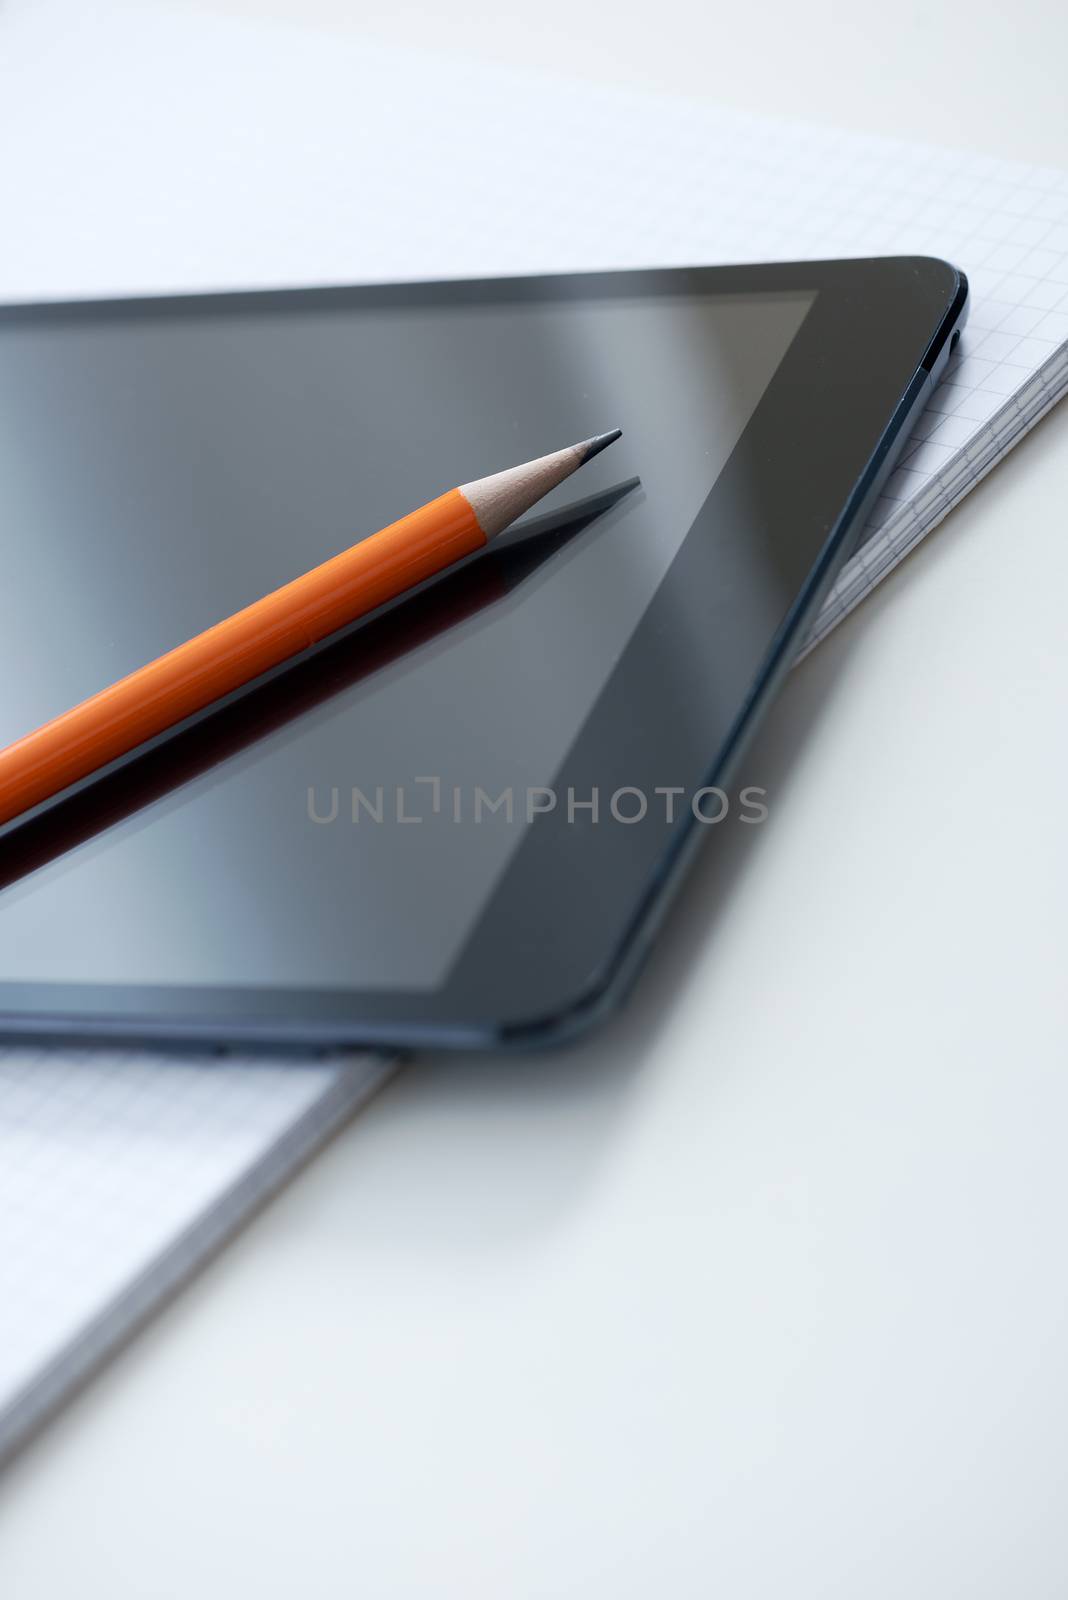 Tablet PC, blank papers and pen on the table.